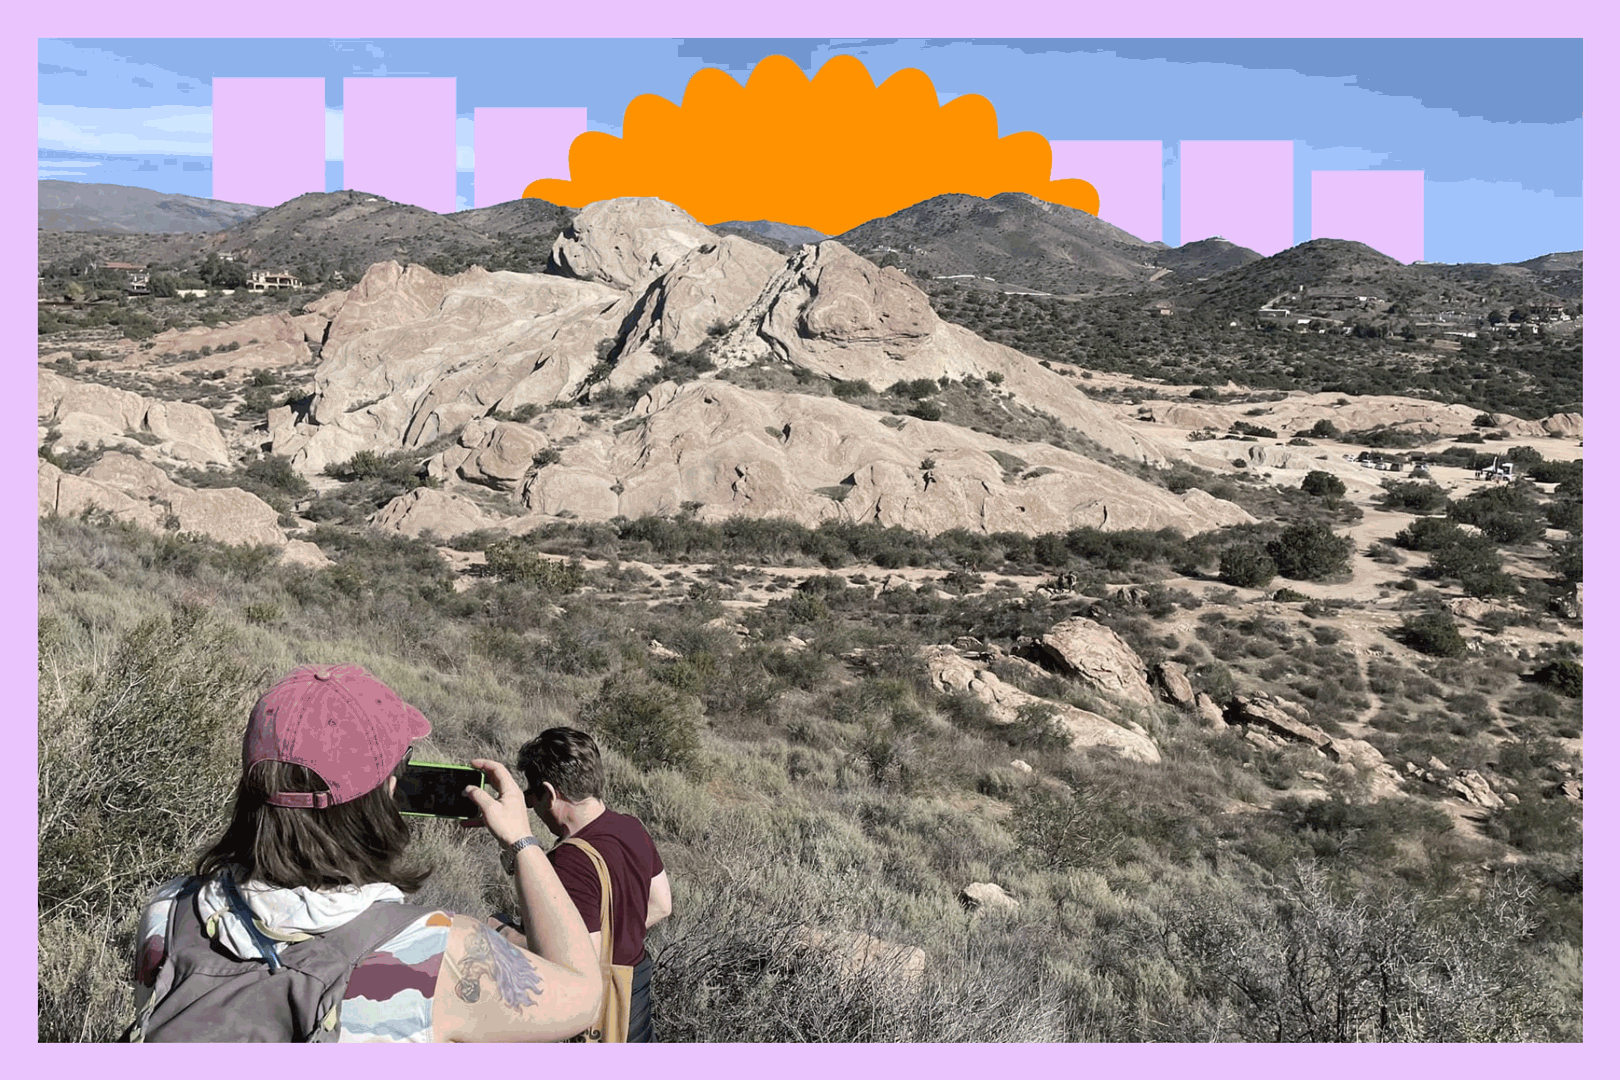 Jaclyn hikes Vasquez Rocks with two close friends.